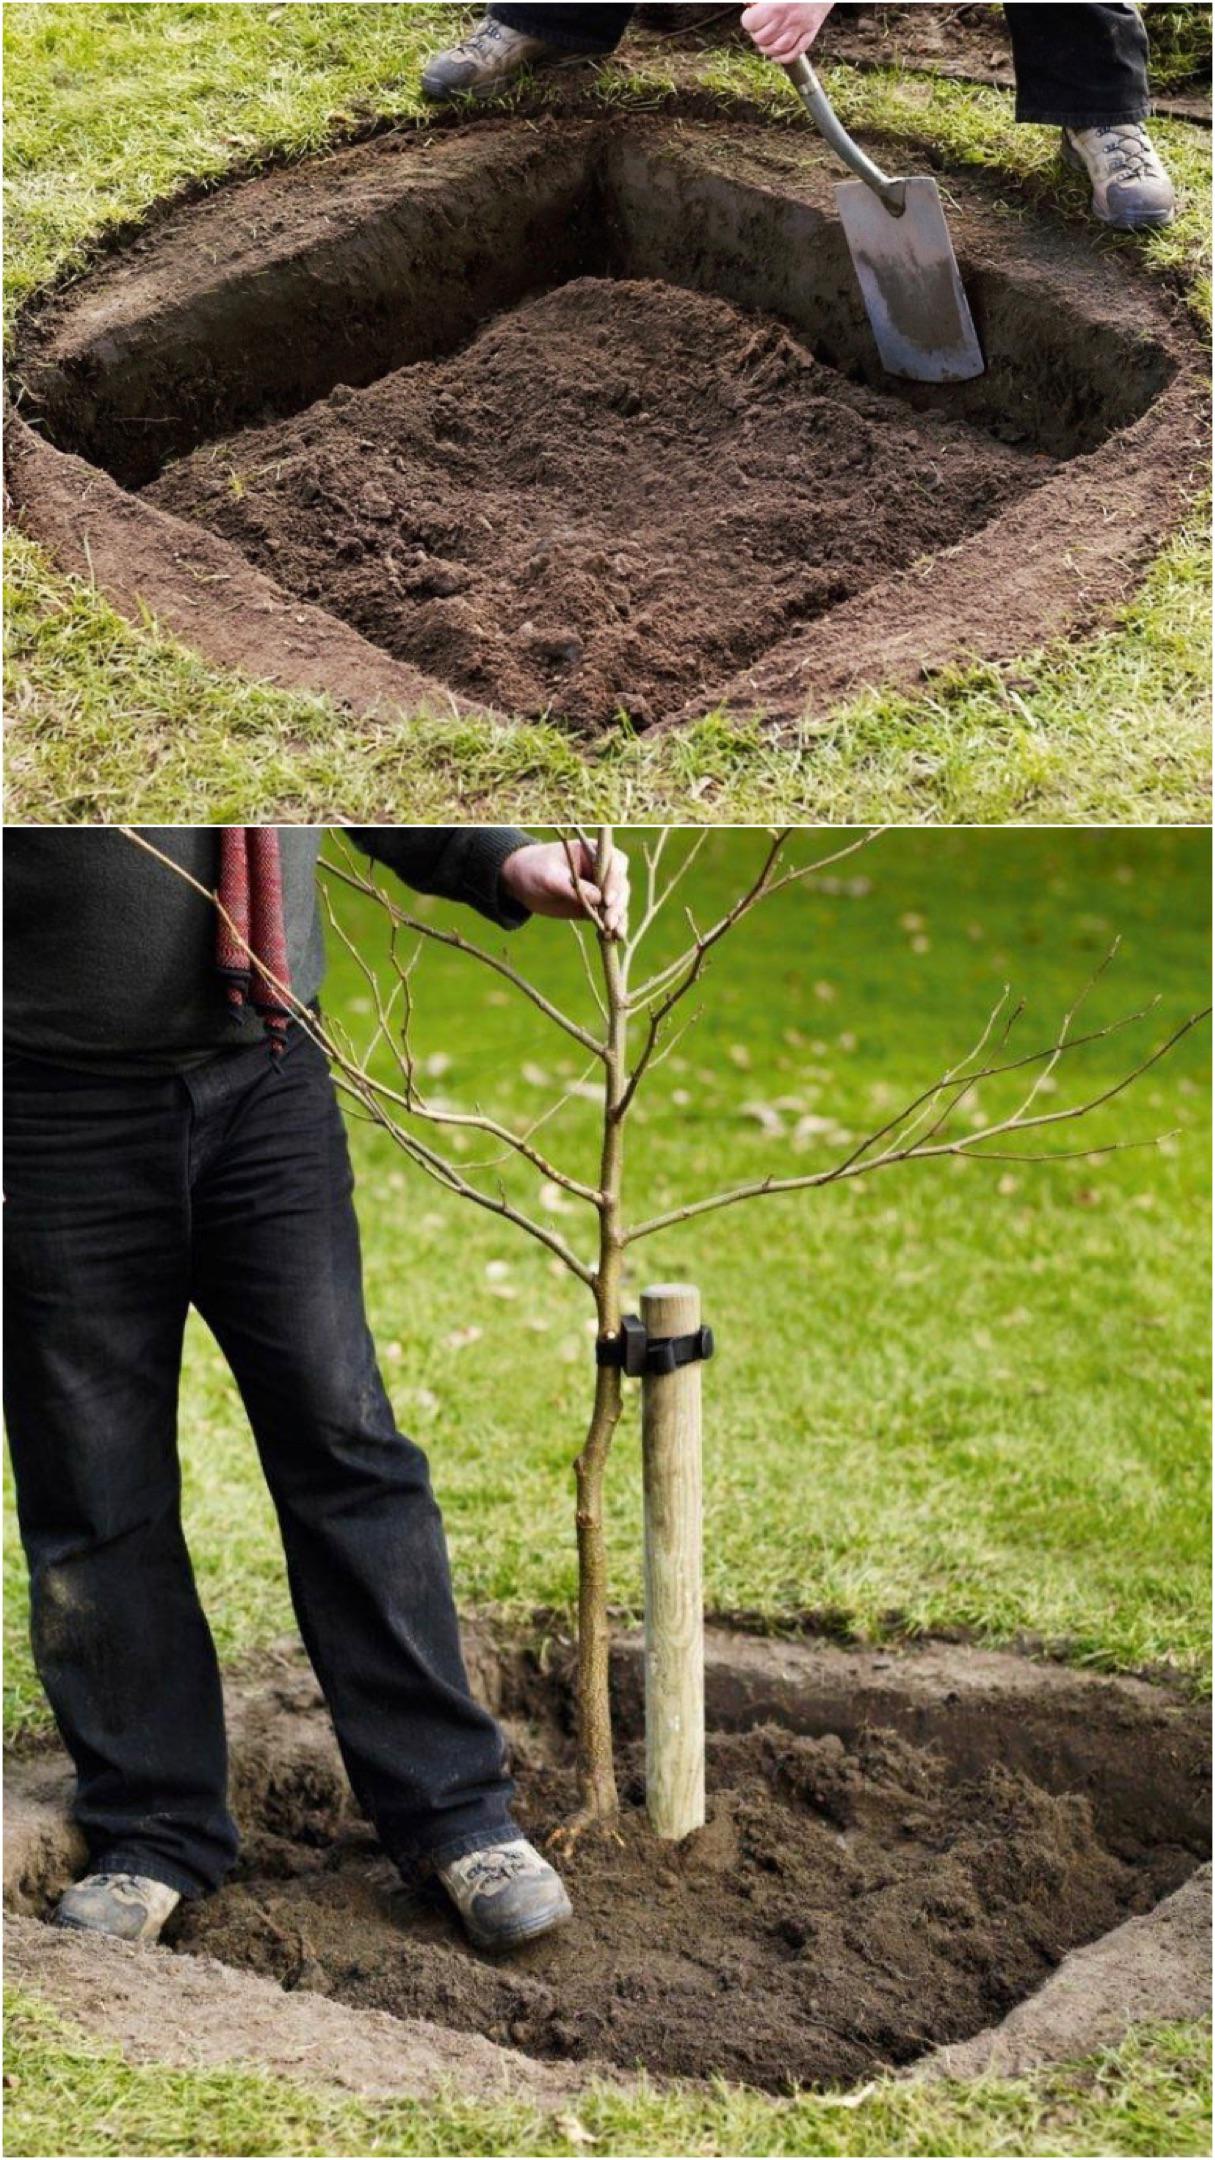 PSA: Planting trees in square holes helps them grow stronger and faster, apparently.